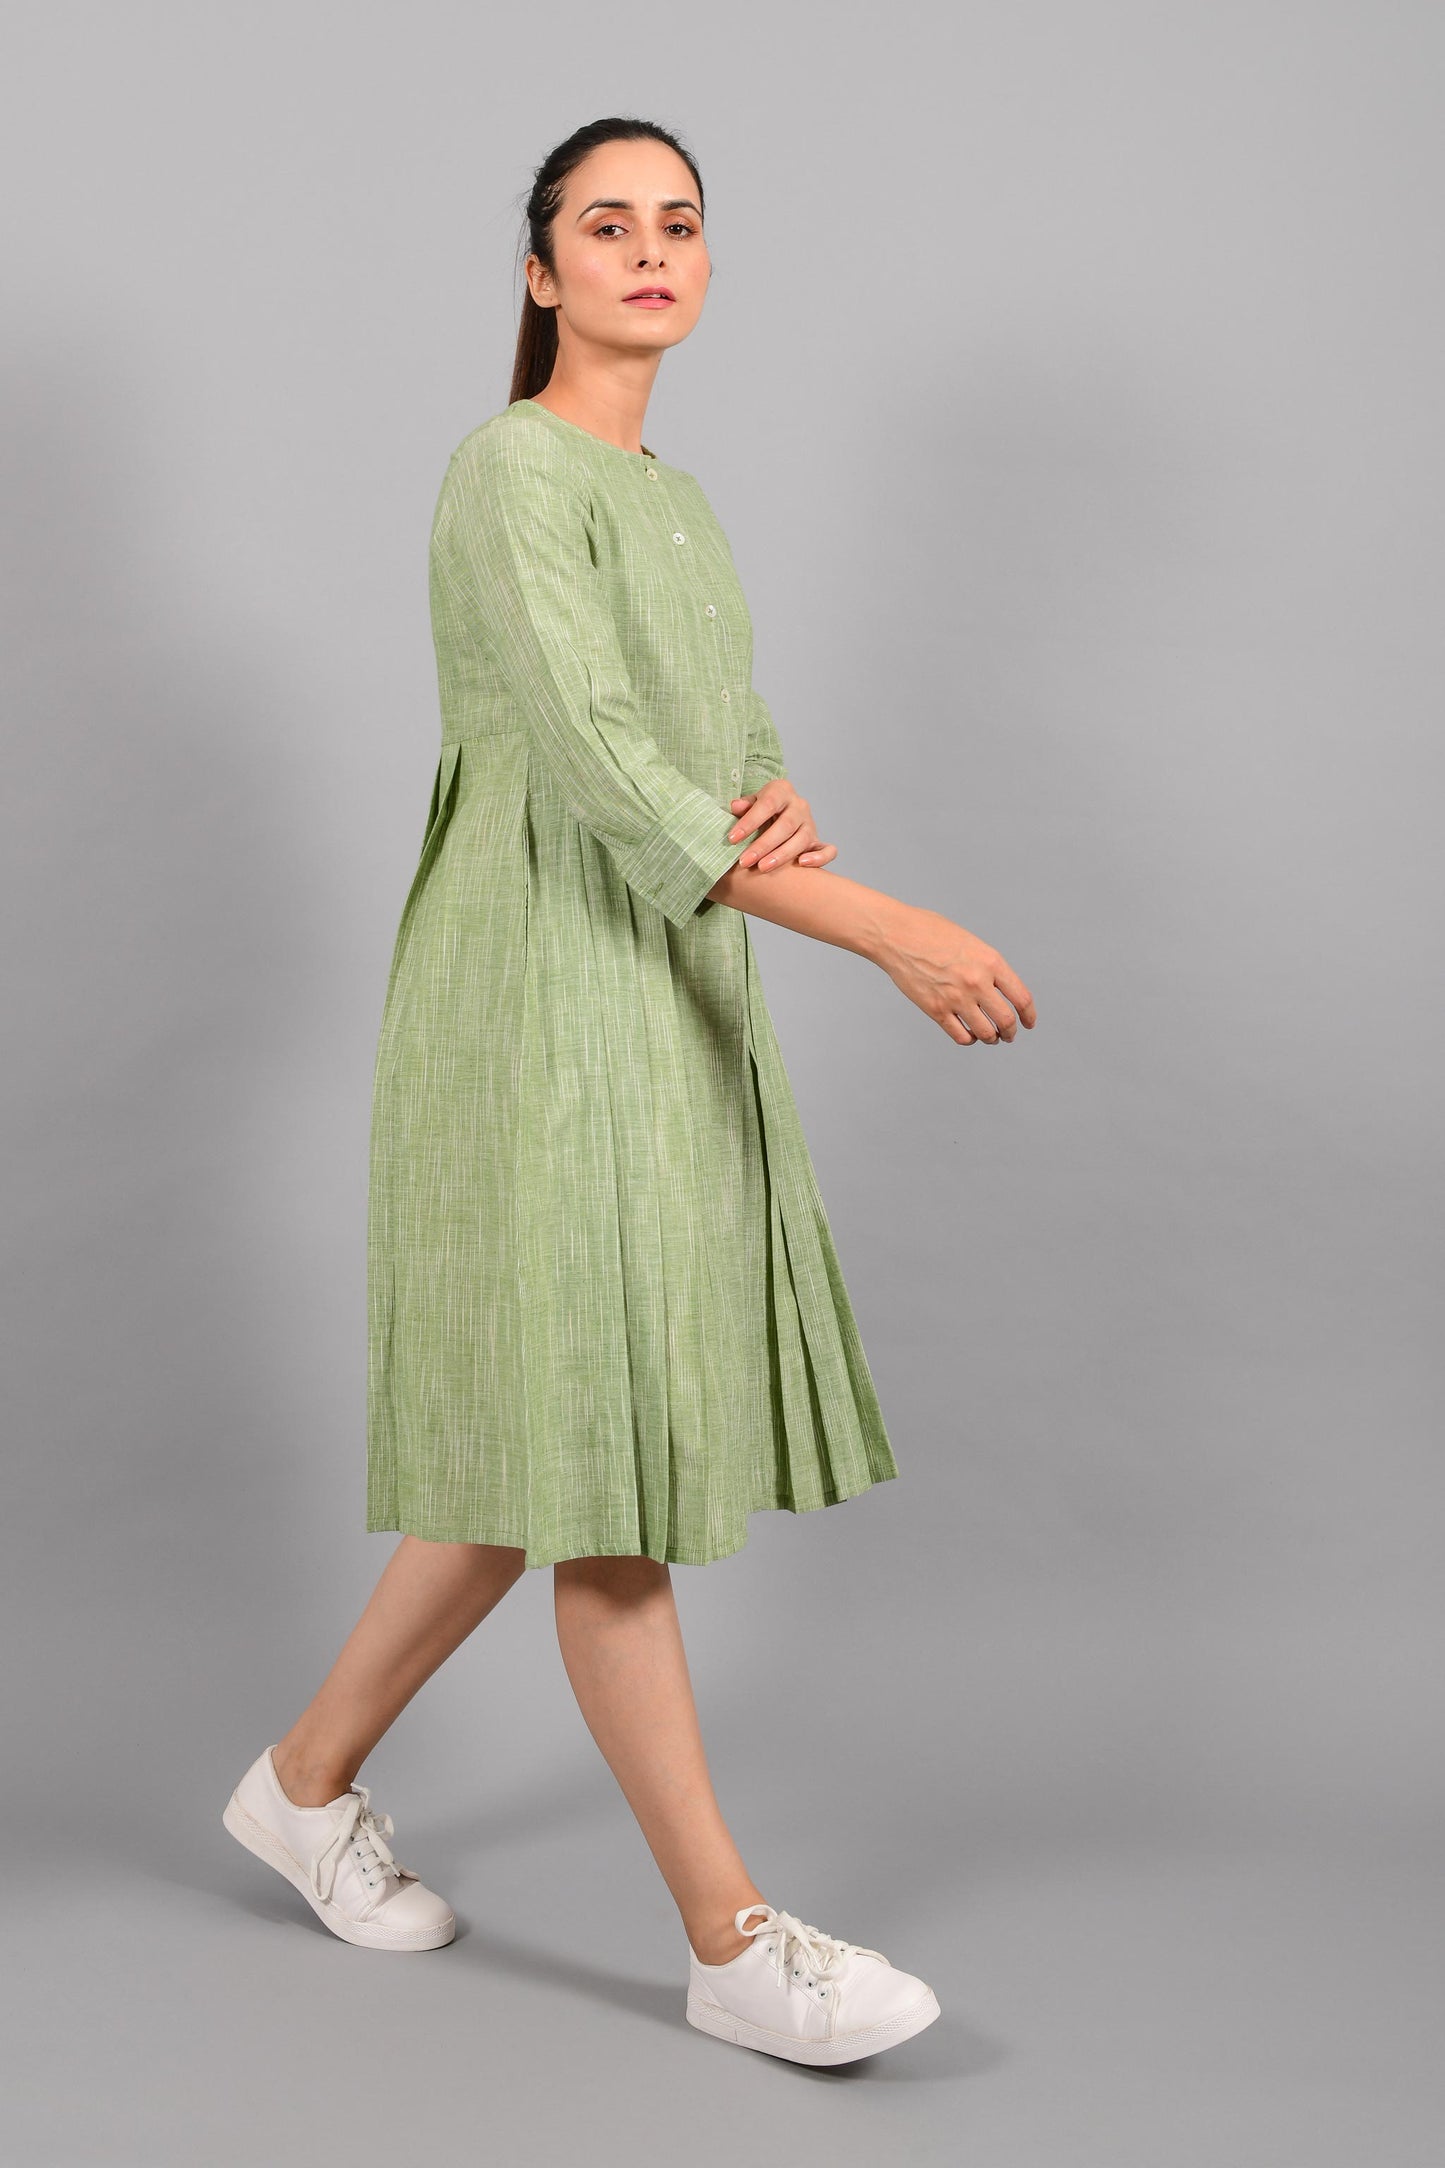 Stylised side pose of an Indian female womenswear fashion model in a space dyed olive green handspun and handwoven khadi cotton pleated dress-kurta by Cotton Rack.